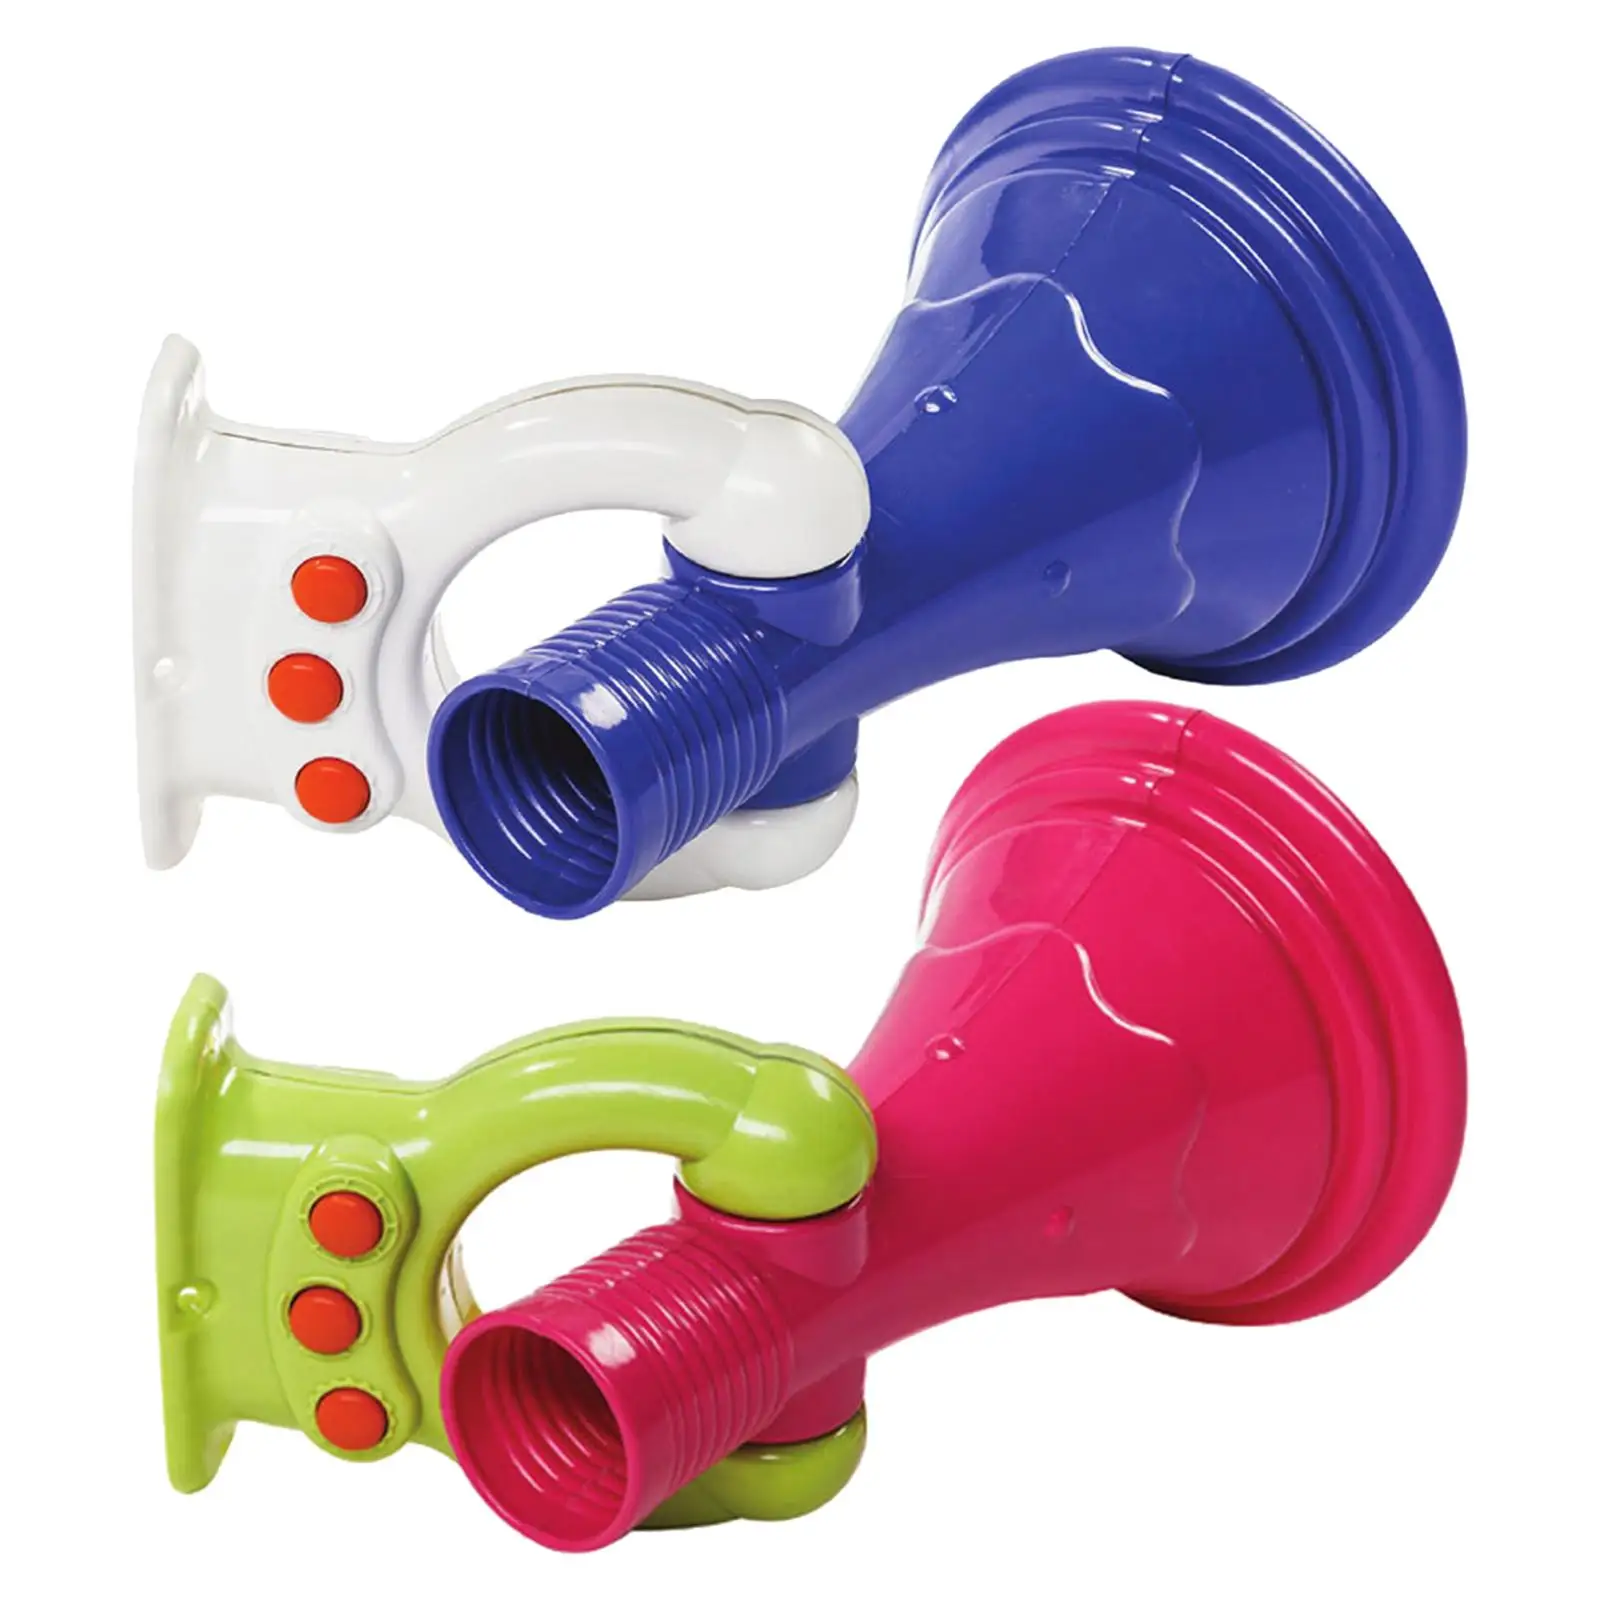 Kid Mounting Megaphone for Playgrounds Slides Fences Tree Houses Supplies